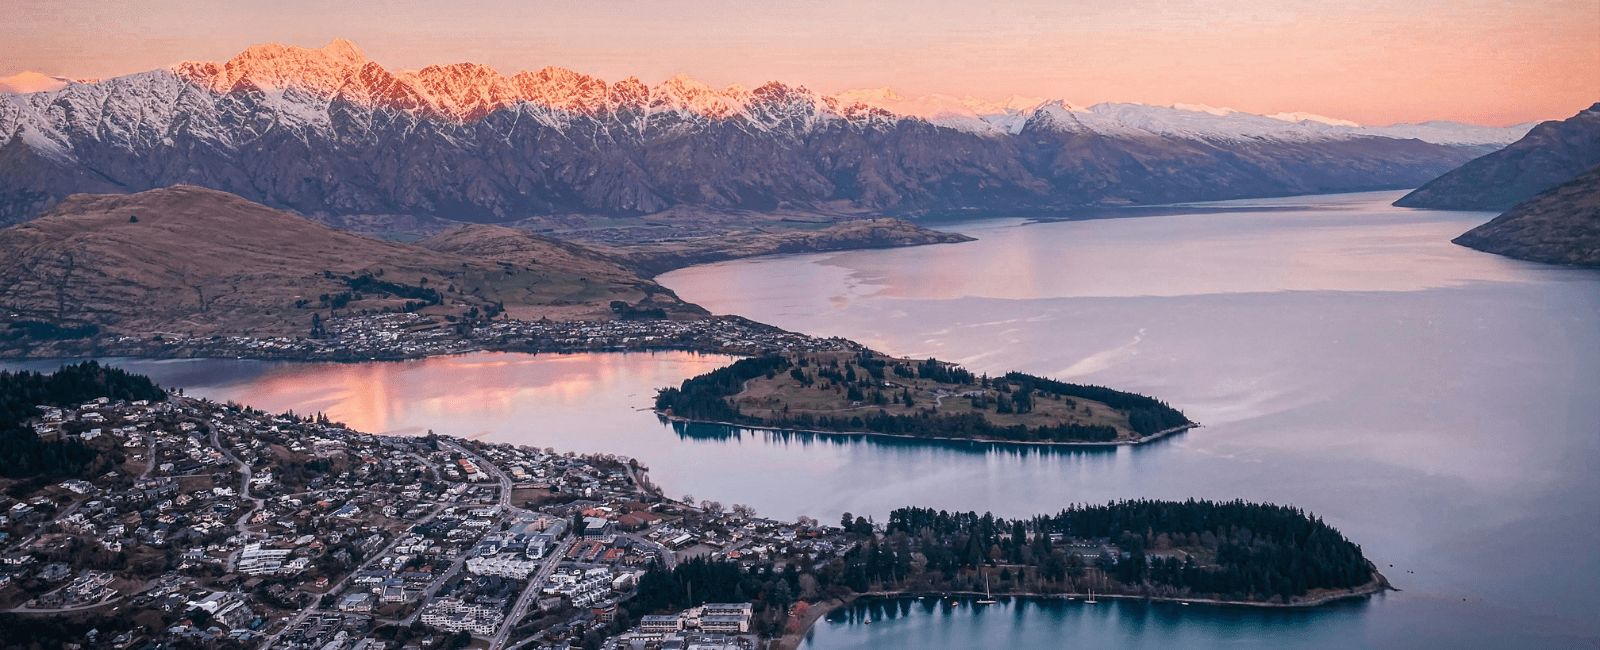 Queenstown lake and mountains